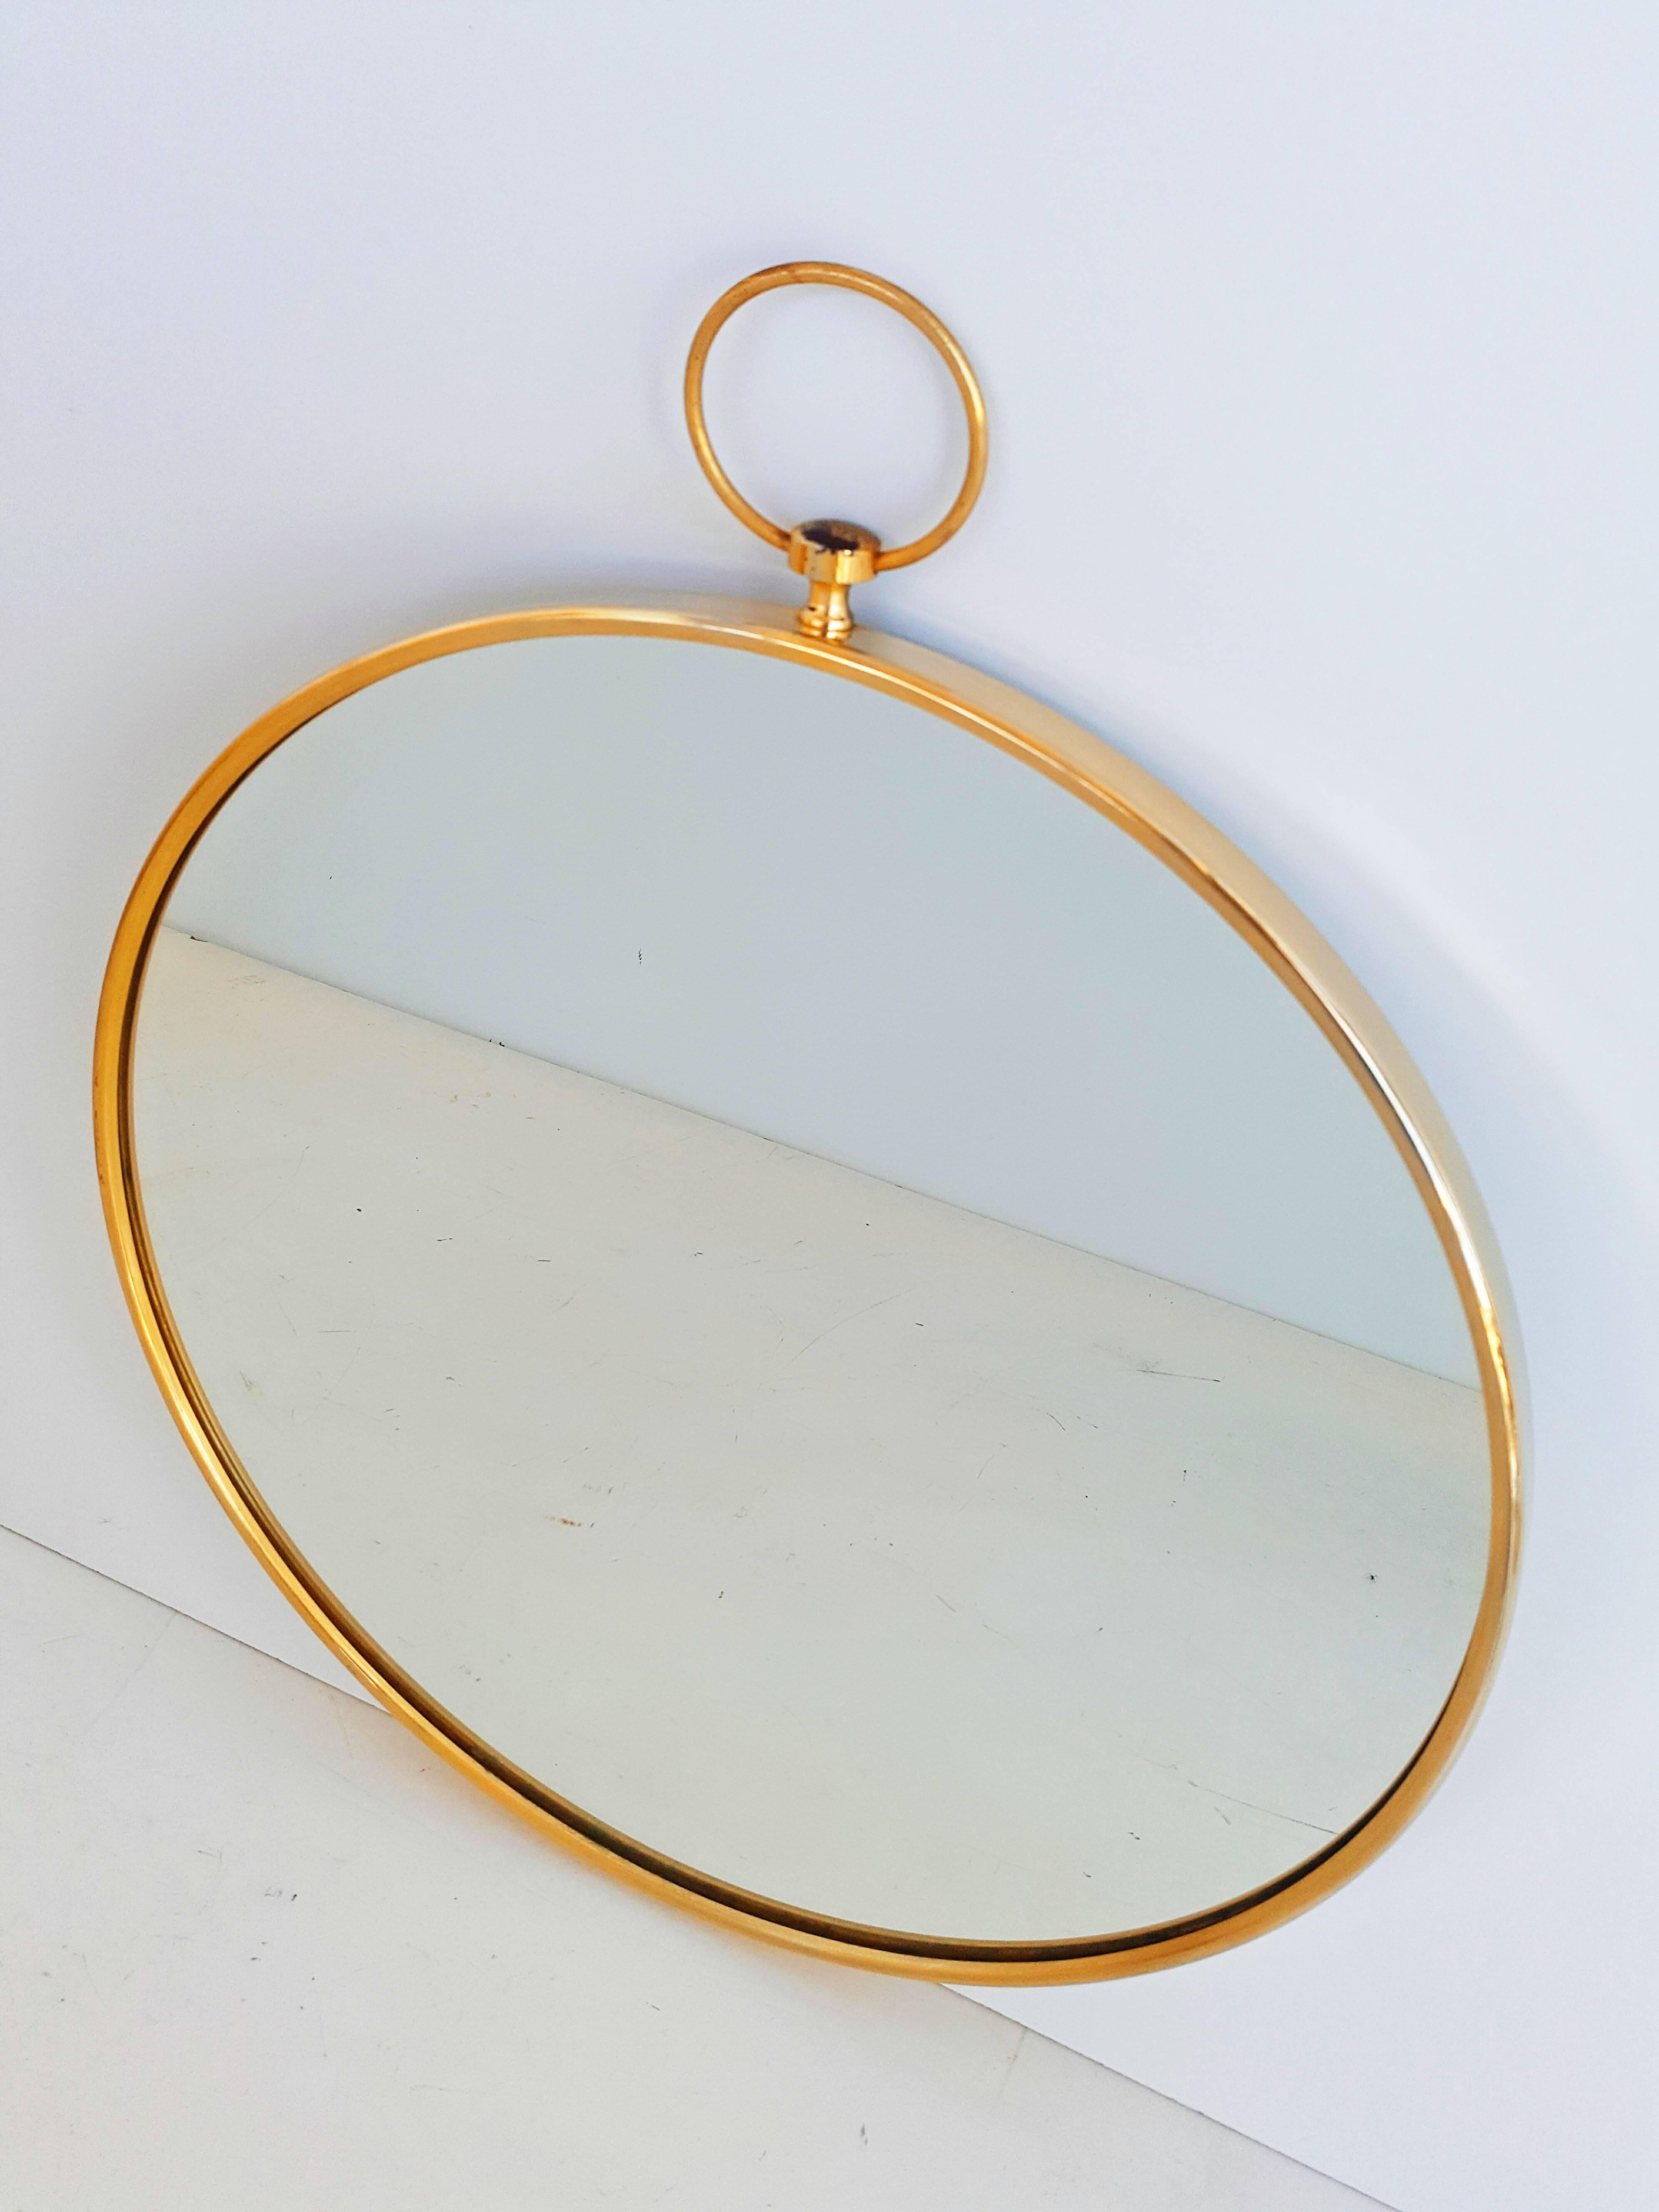 Beautiful circular brass mirror from France manufactured in the 1950s.
Very pretty with its brass ring at the top.
Total height with ring: 63 cms.